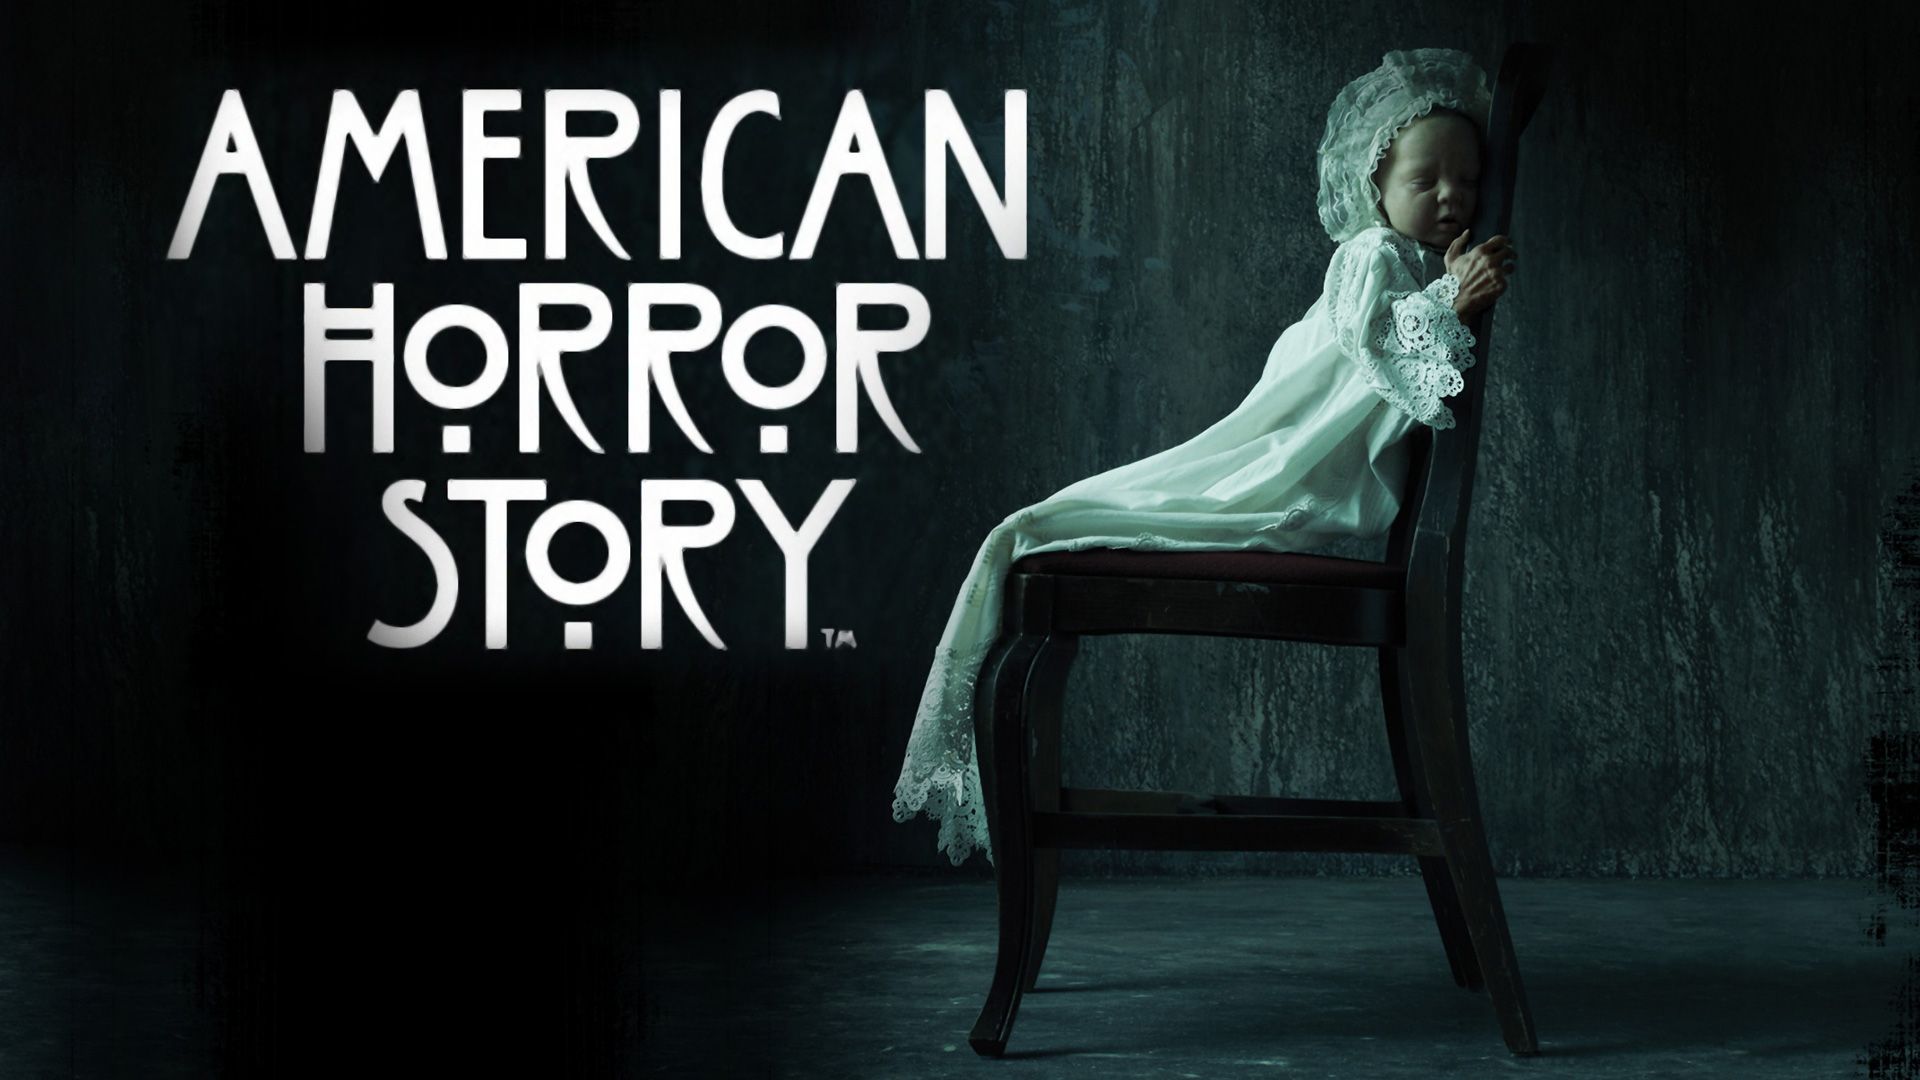 Free download American Horror Story Coven wallpaper 843309 [1920x1080] for your Desktop, Mobile & Tablet. Explore AHS Coven Wallpaper. AHS Coven Wallpaper, AHS Wallpaper, AHS Hotel Wallpaper